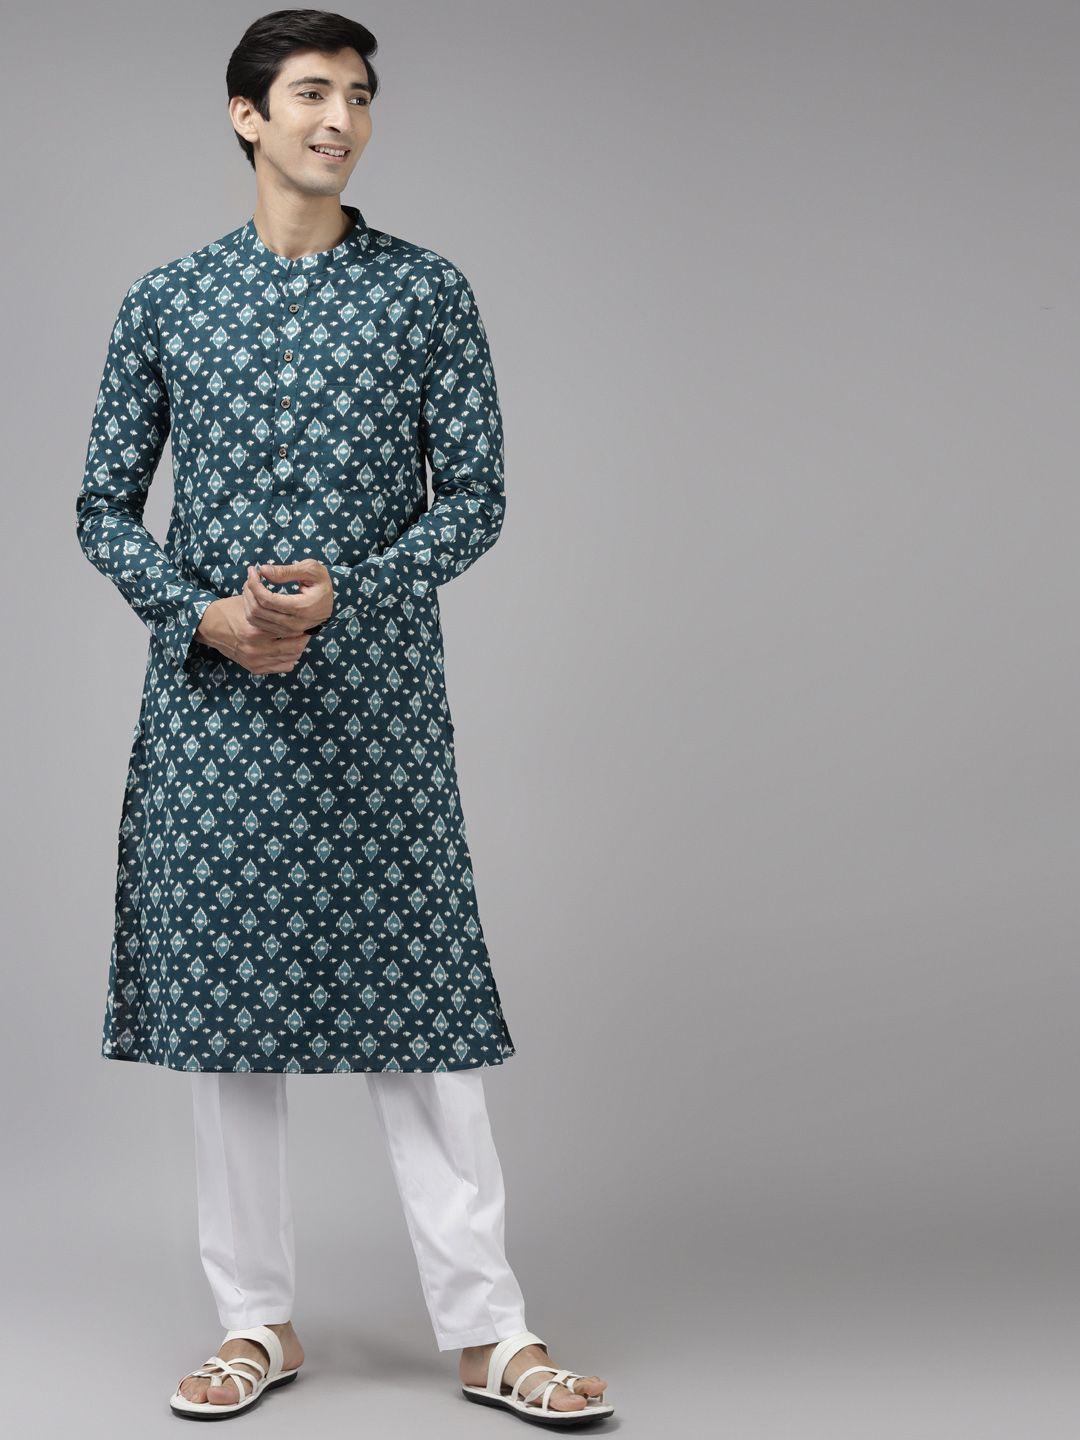 see-designs-men-teal-blue-ethnic-motifs-printed-pure-cotton-kurta-with-trousers